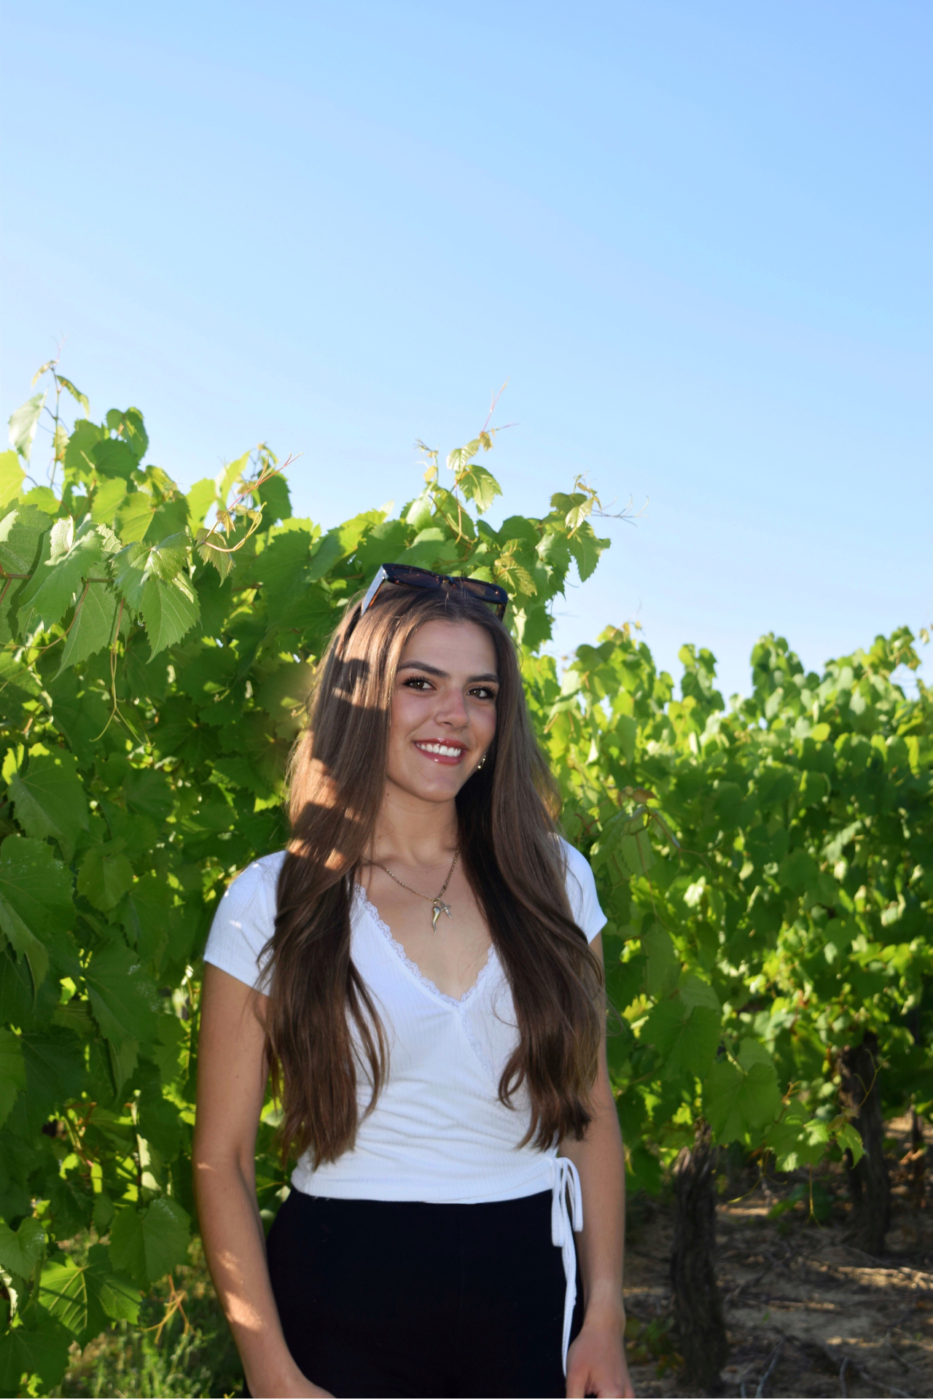 Woman with long brown hair in a white t-shirt smiling while standing in a vineyard